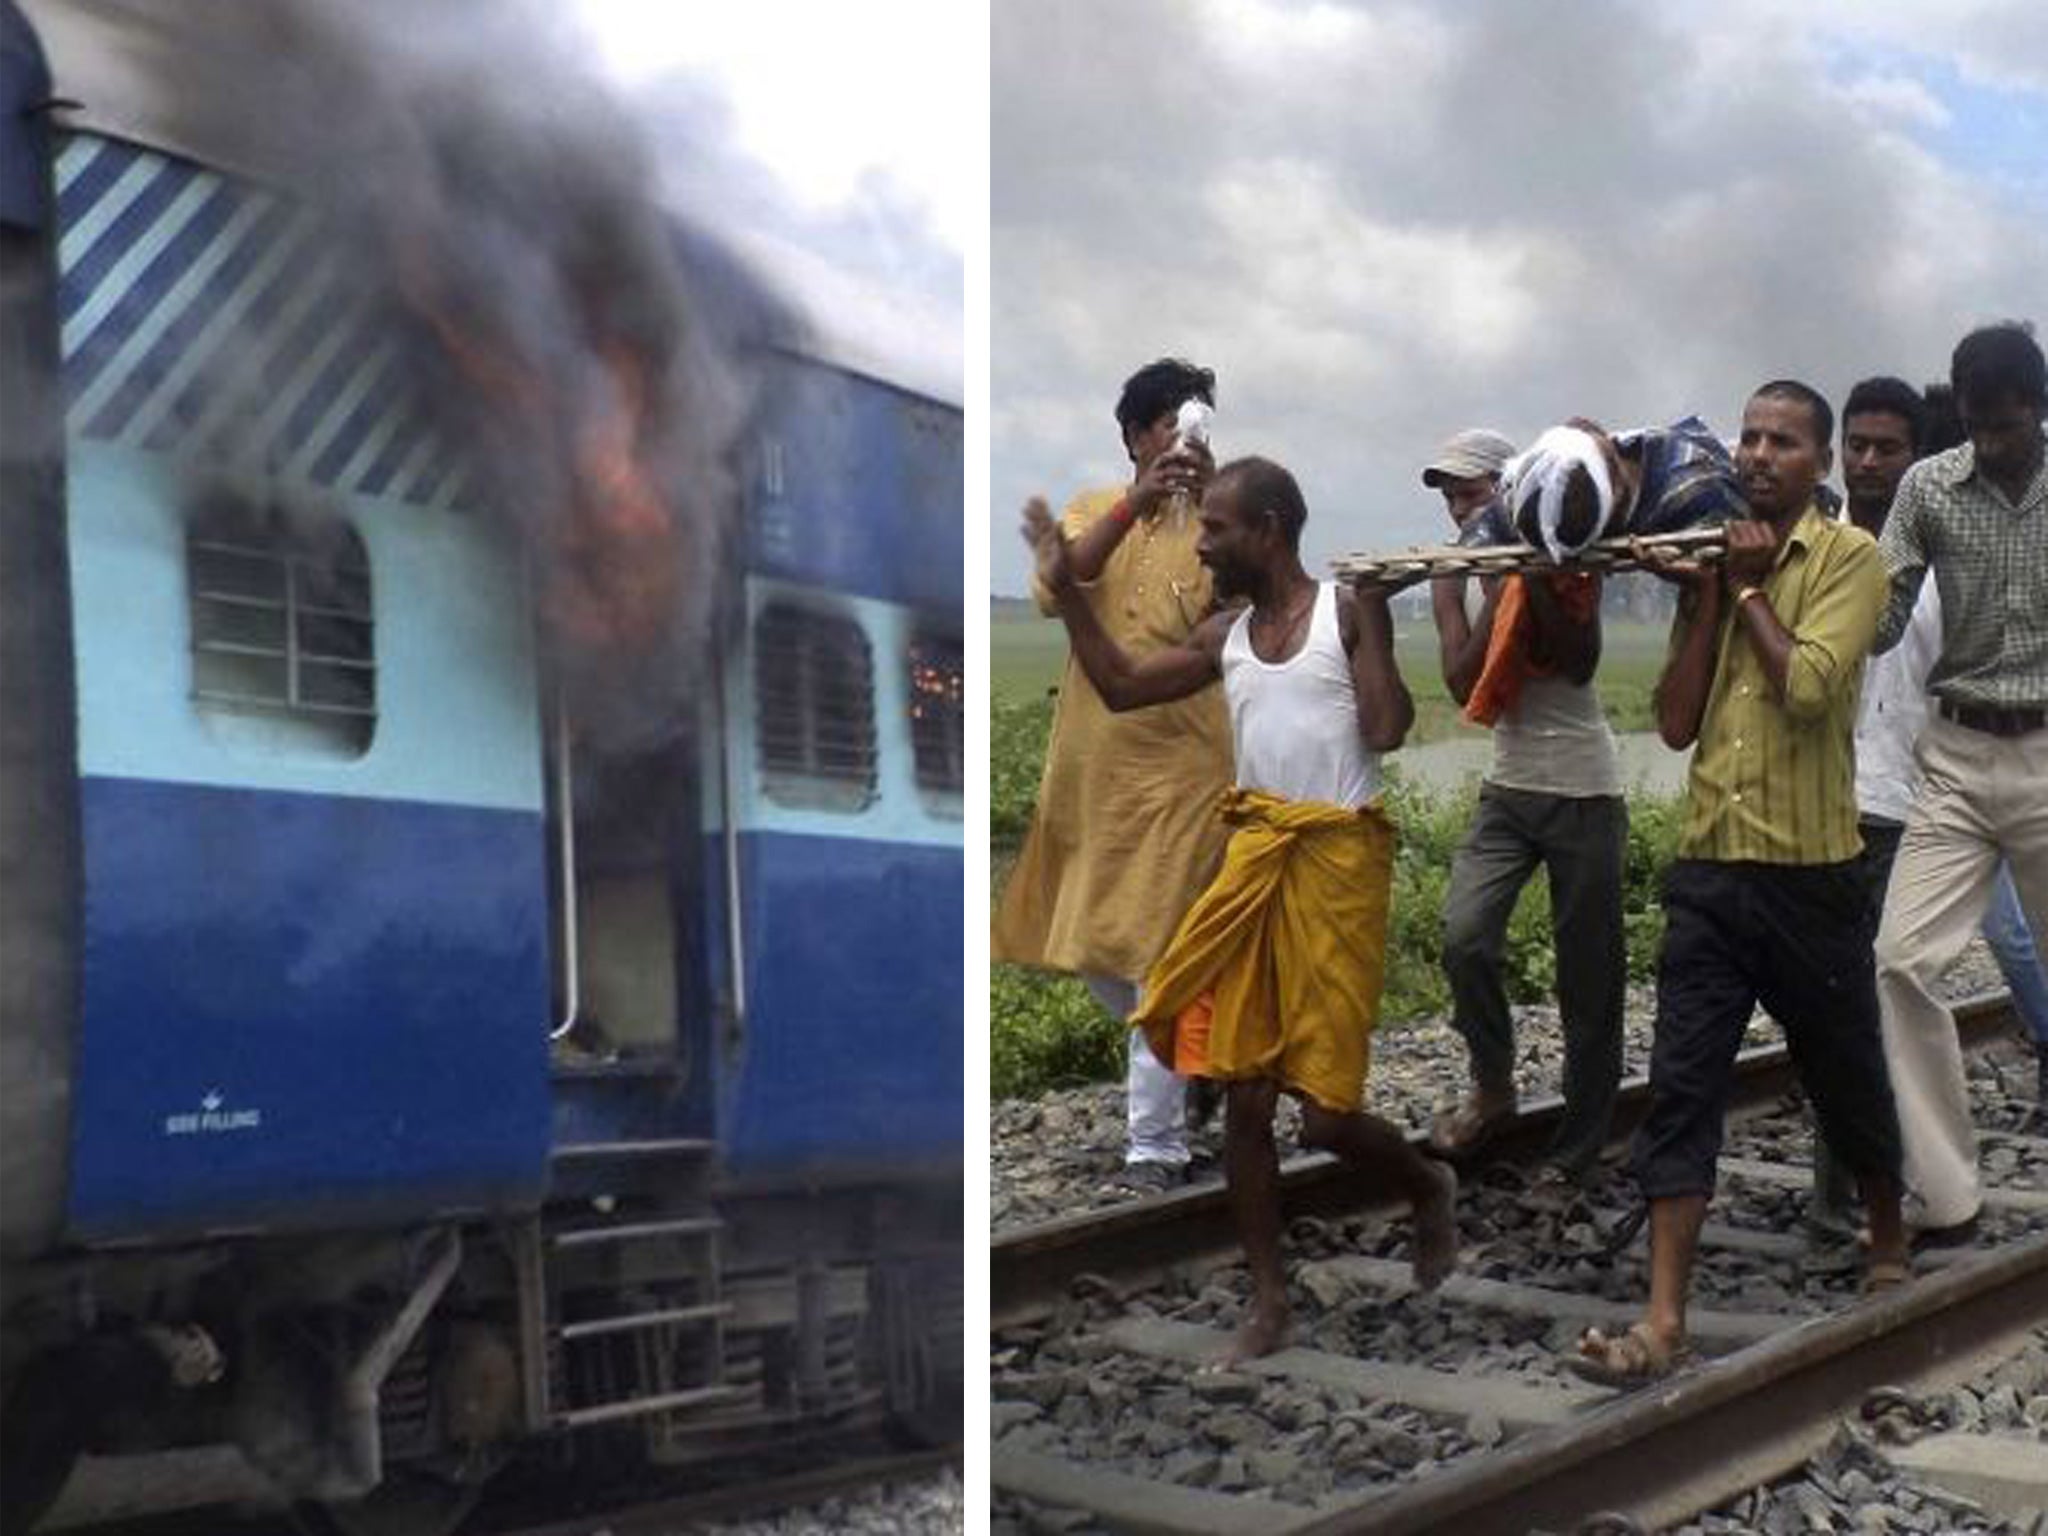 Coaches of the Rajya Rani Express train burn after a mob set it on fire as it ran over a group of Hindu pilgrims in Bihar state, India. And right, villagers carry away an injured person